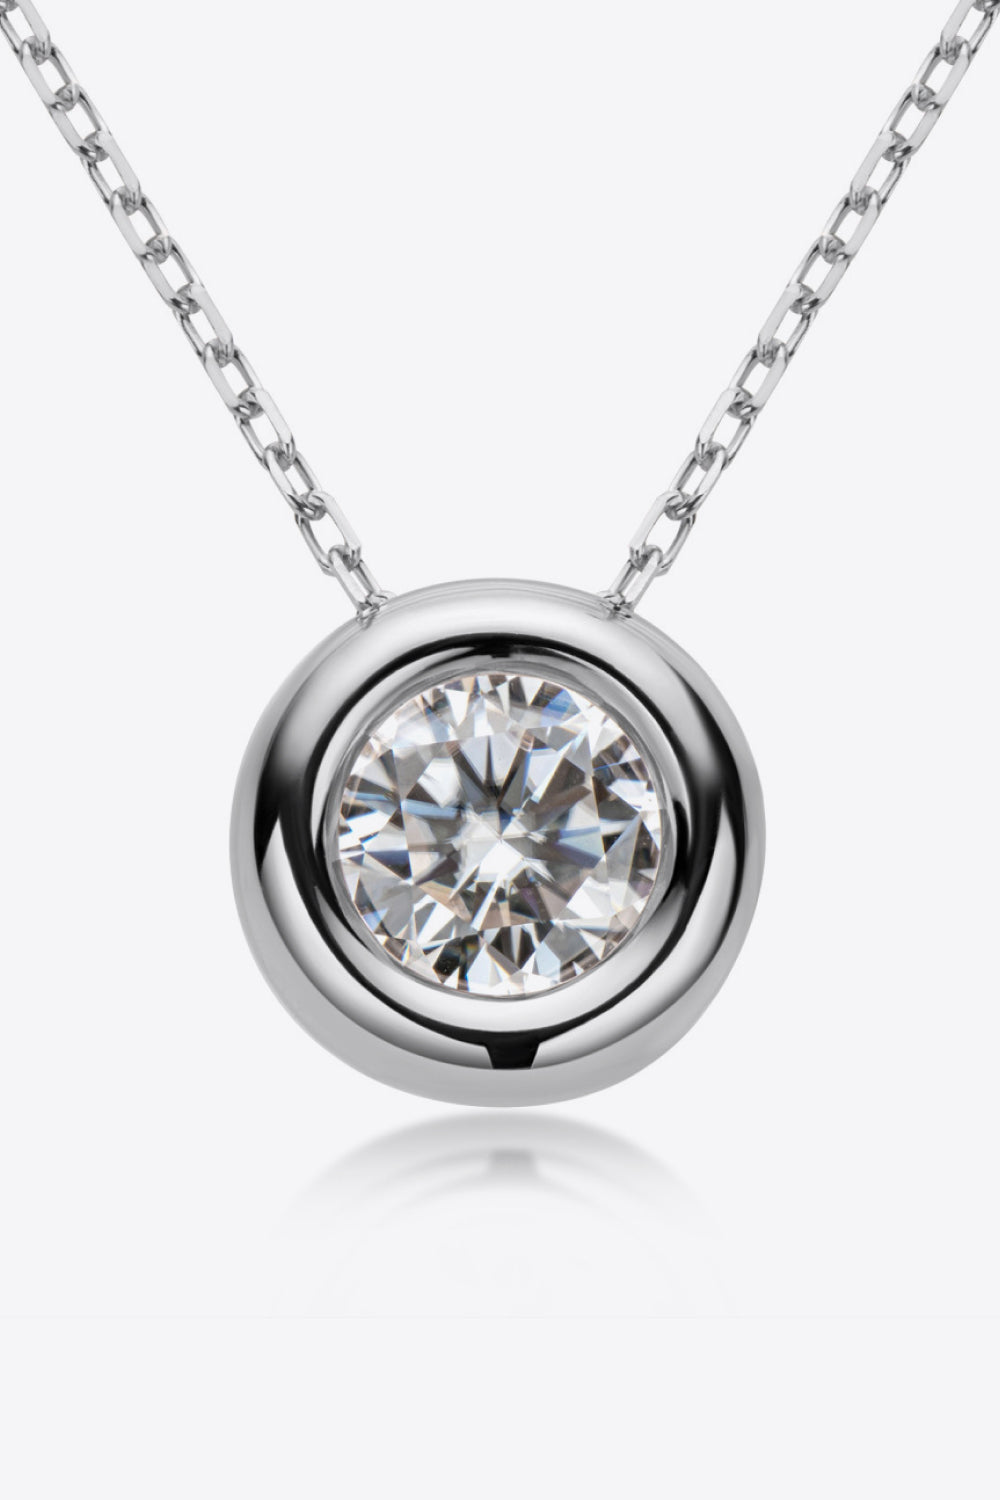 Adored Chain Necklaces Silver / One Size Baeful 1 Carat Moissanite Pendant 925 Sterling Silver Necklace